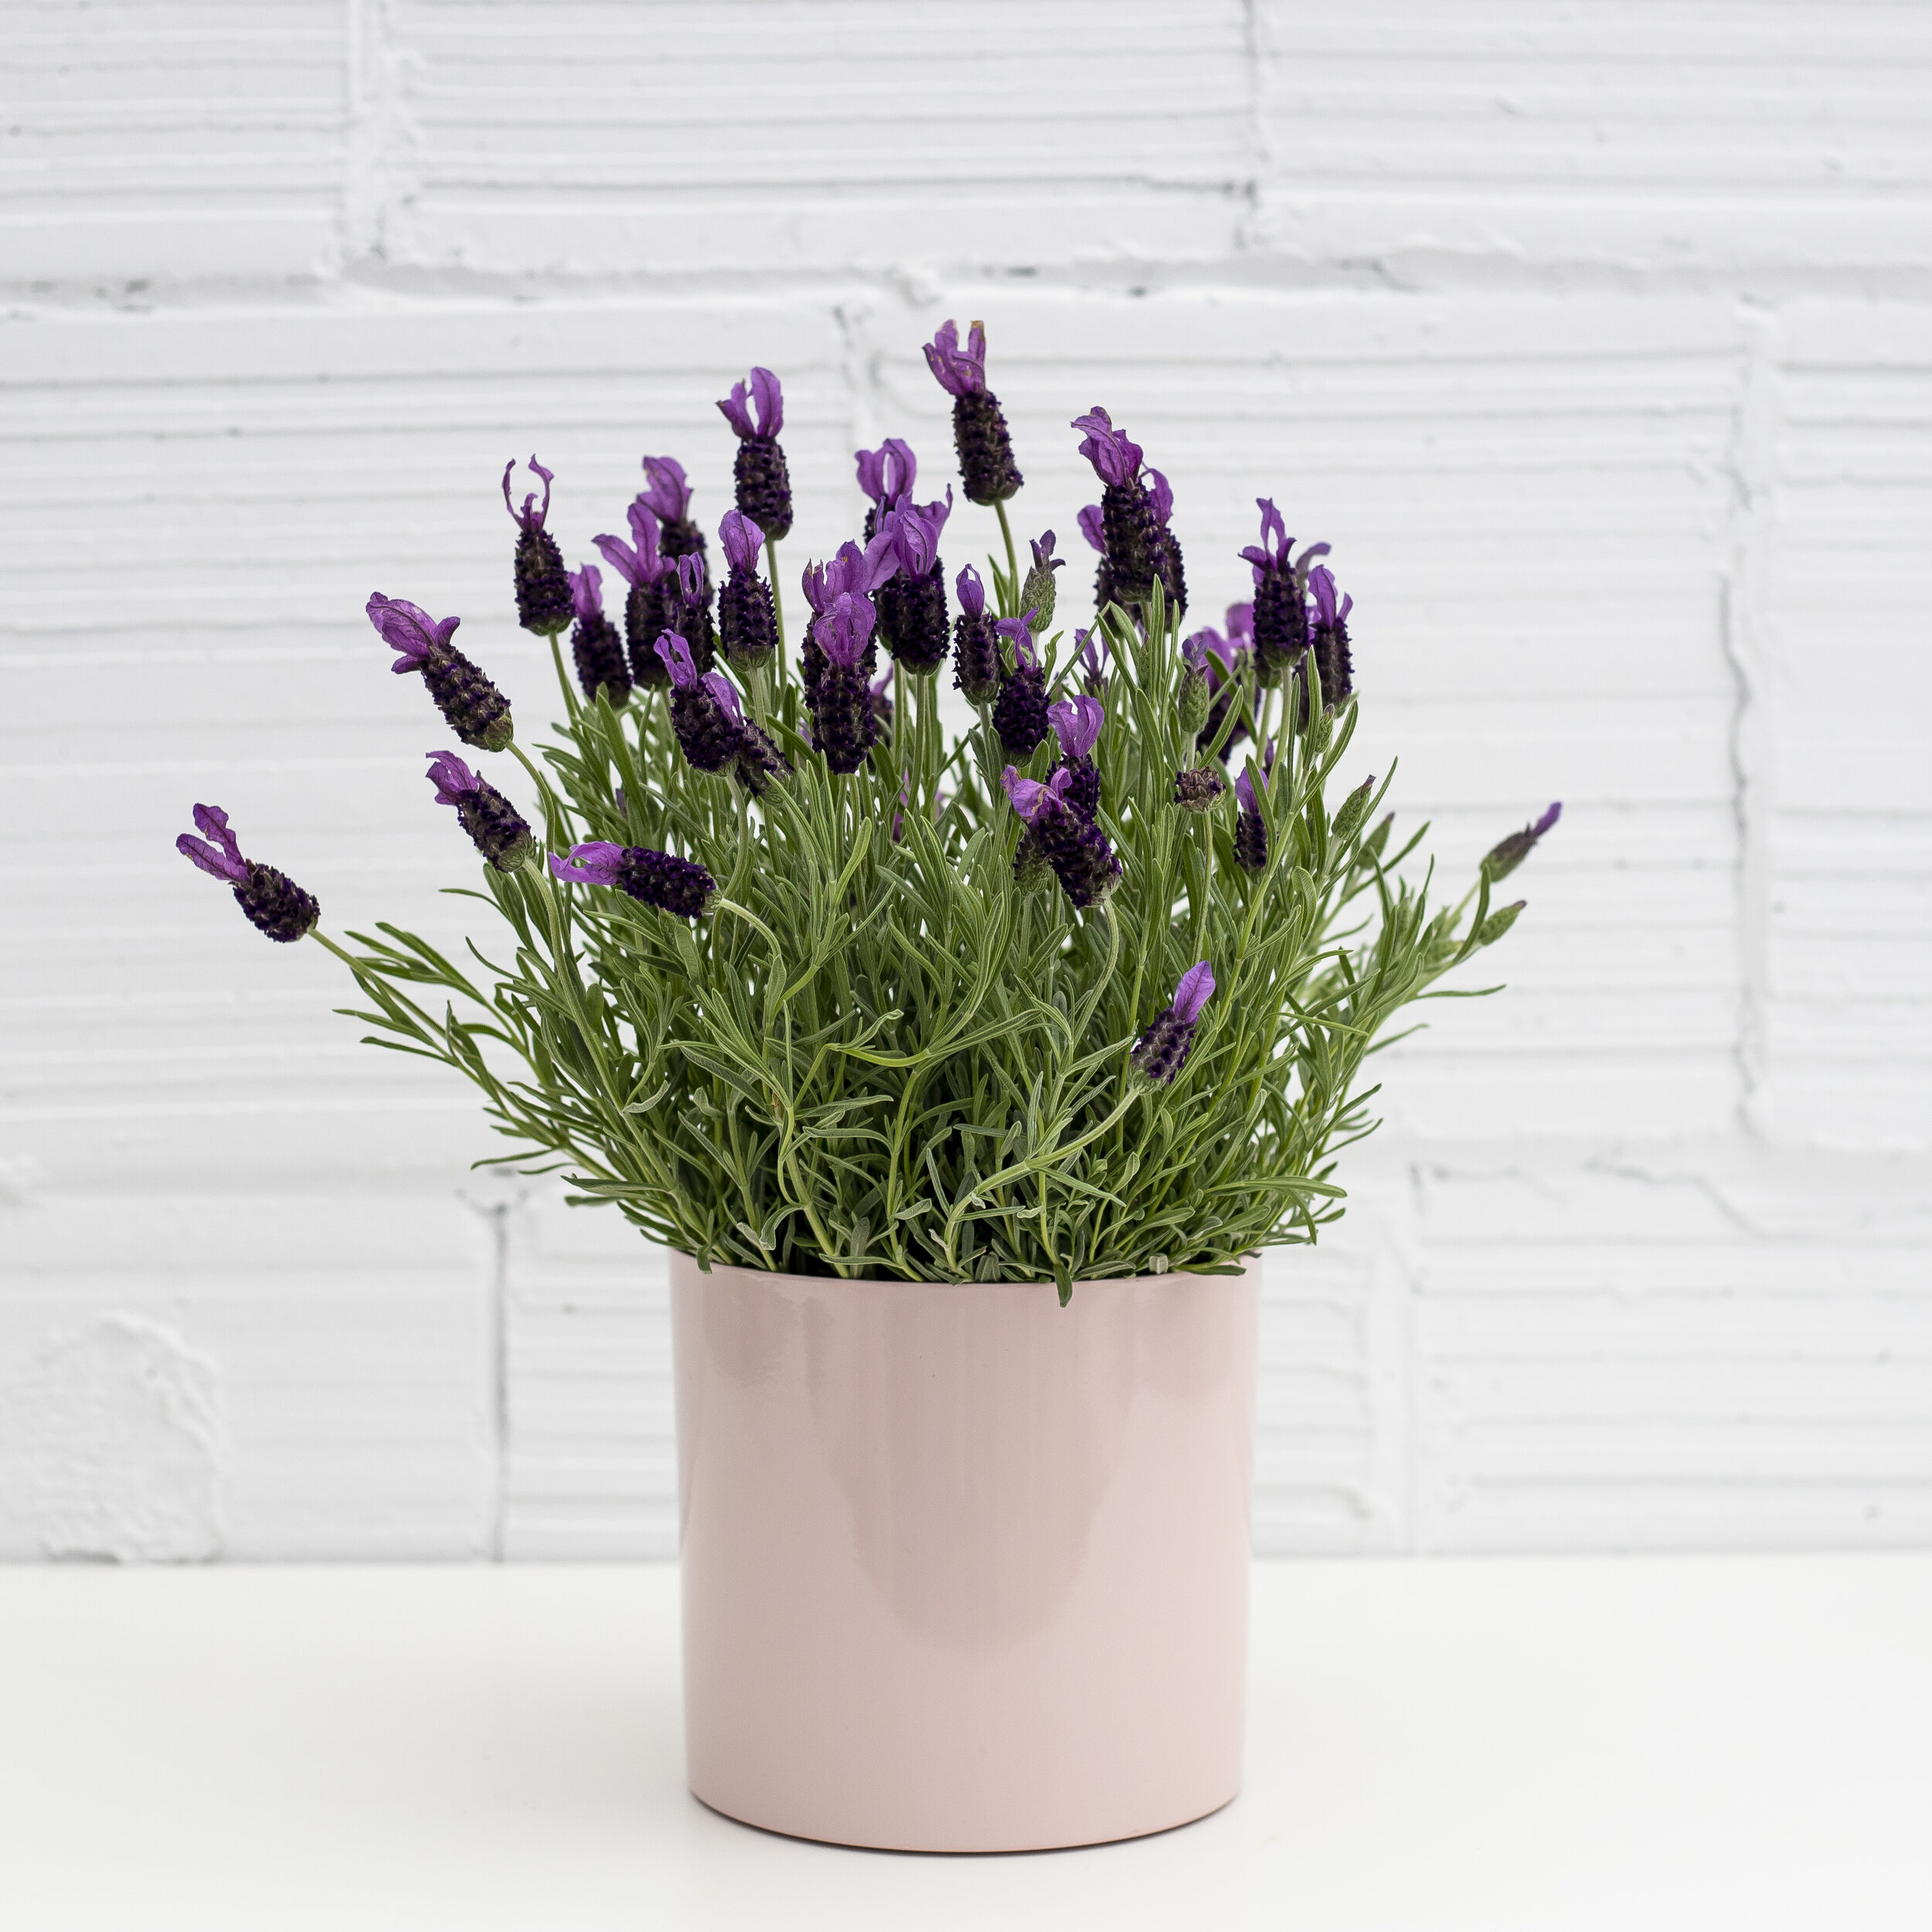 A Spanish Lavender plant in a blush colored pot sitting in front of a white concrete wall